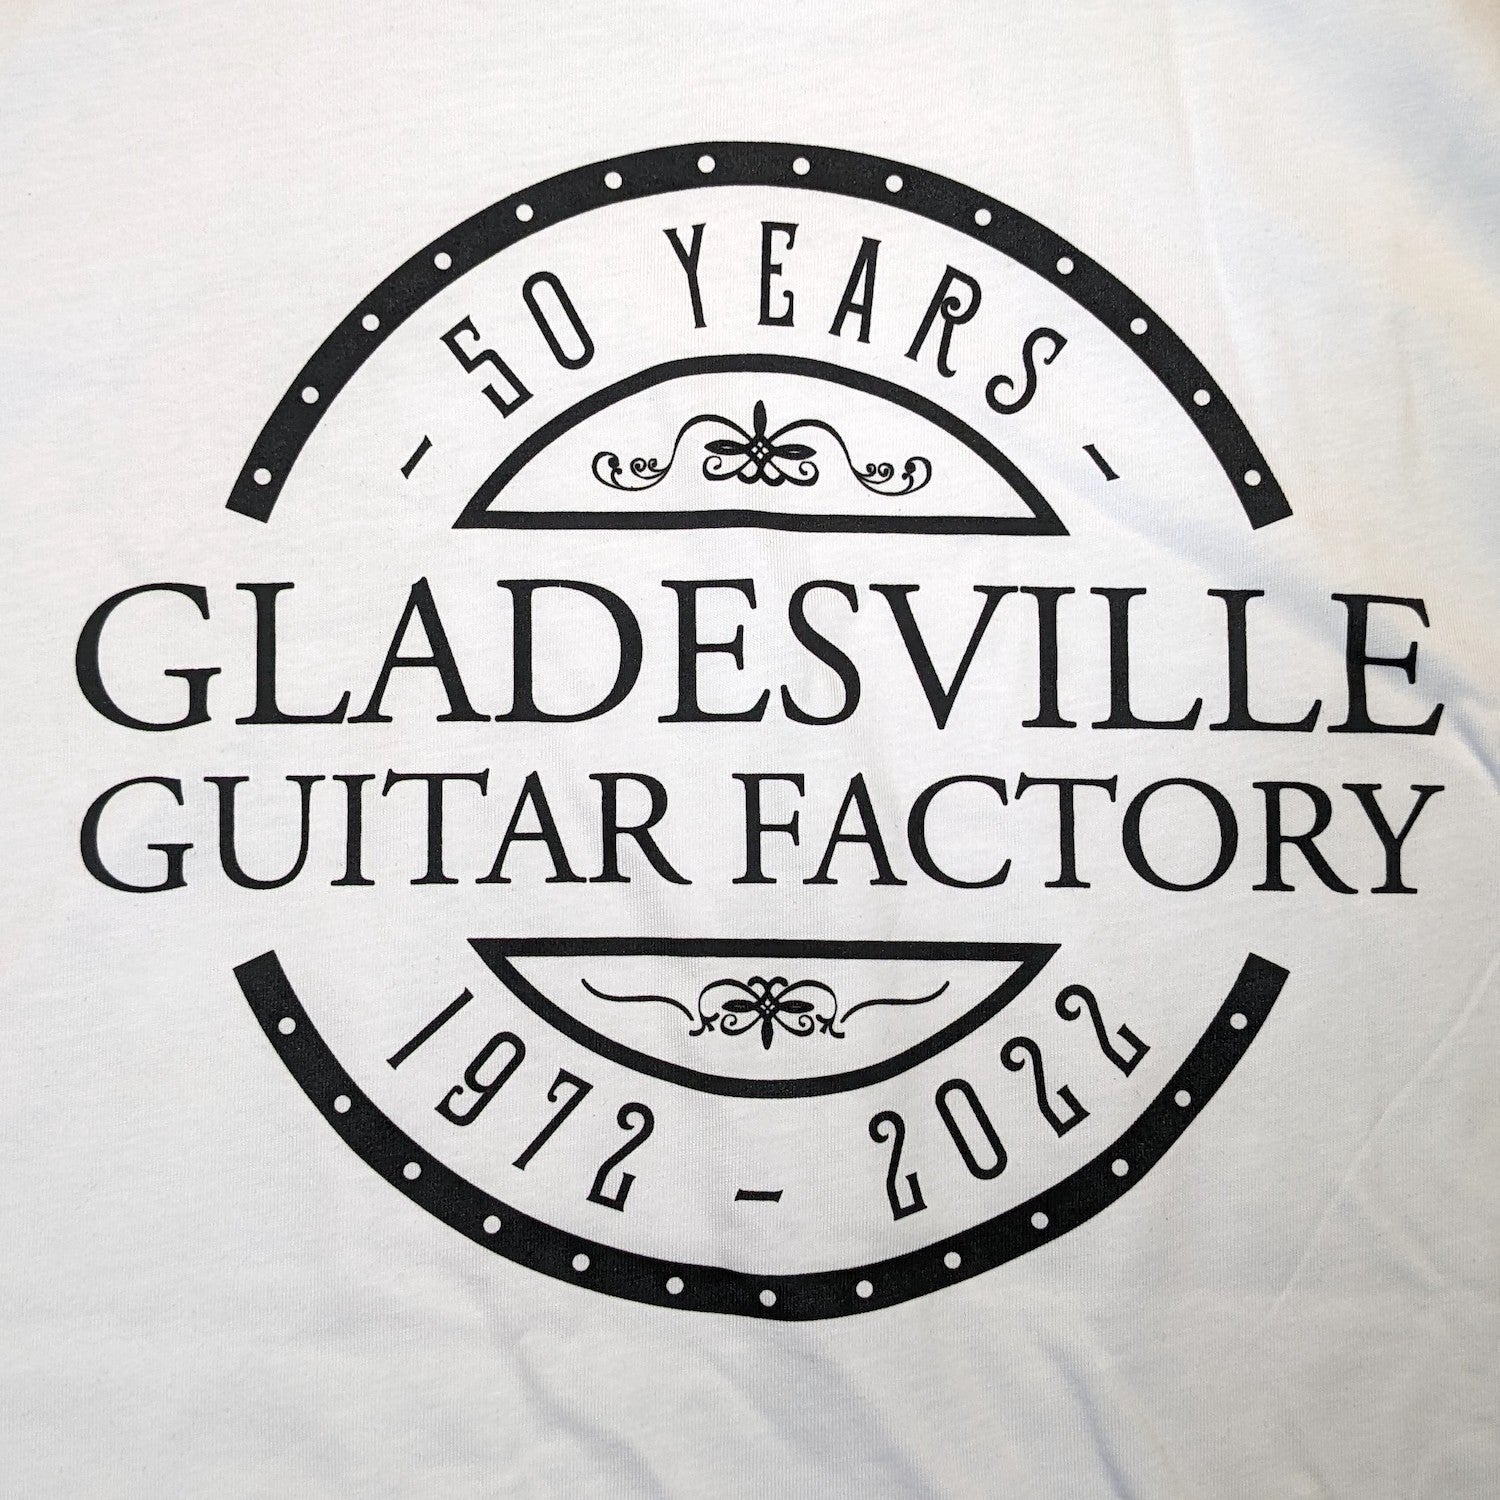 Guitar Factory 50 Years Tee - White L